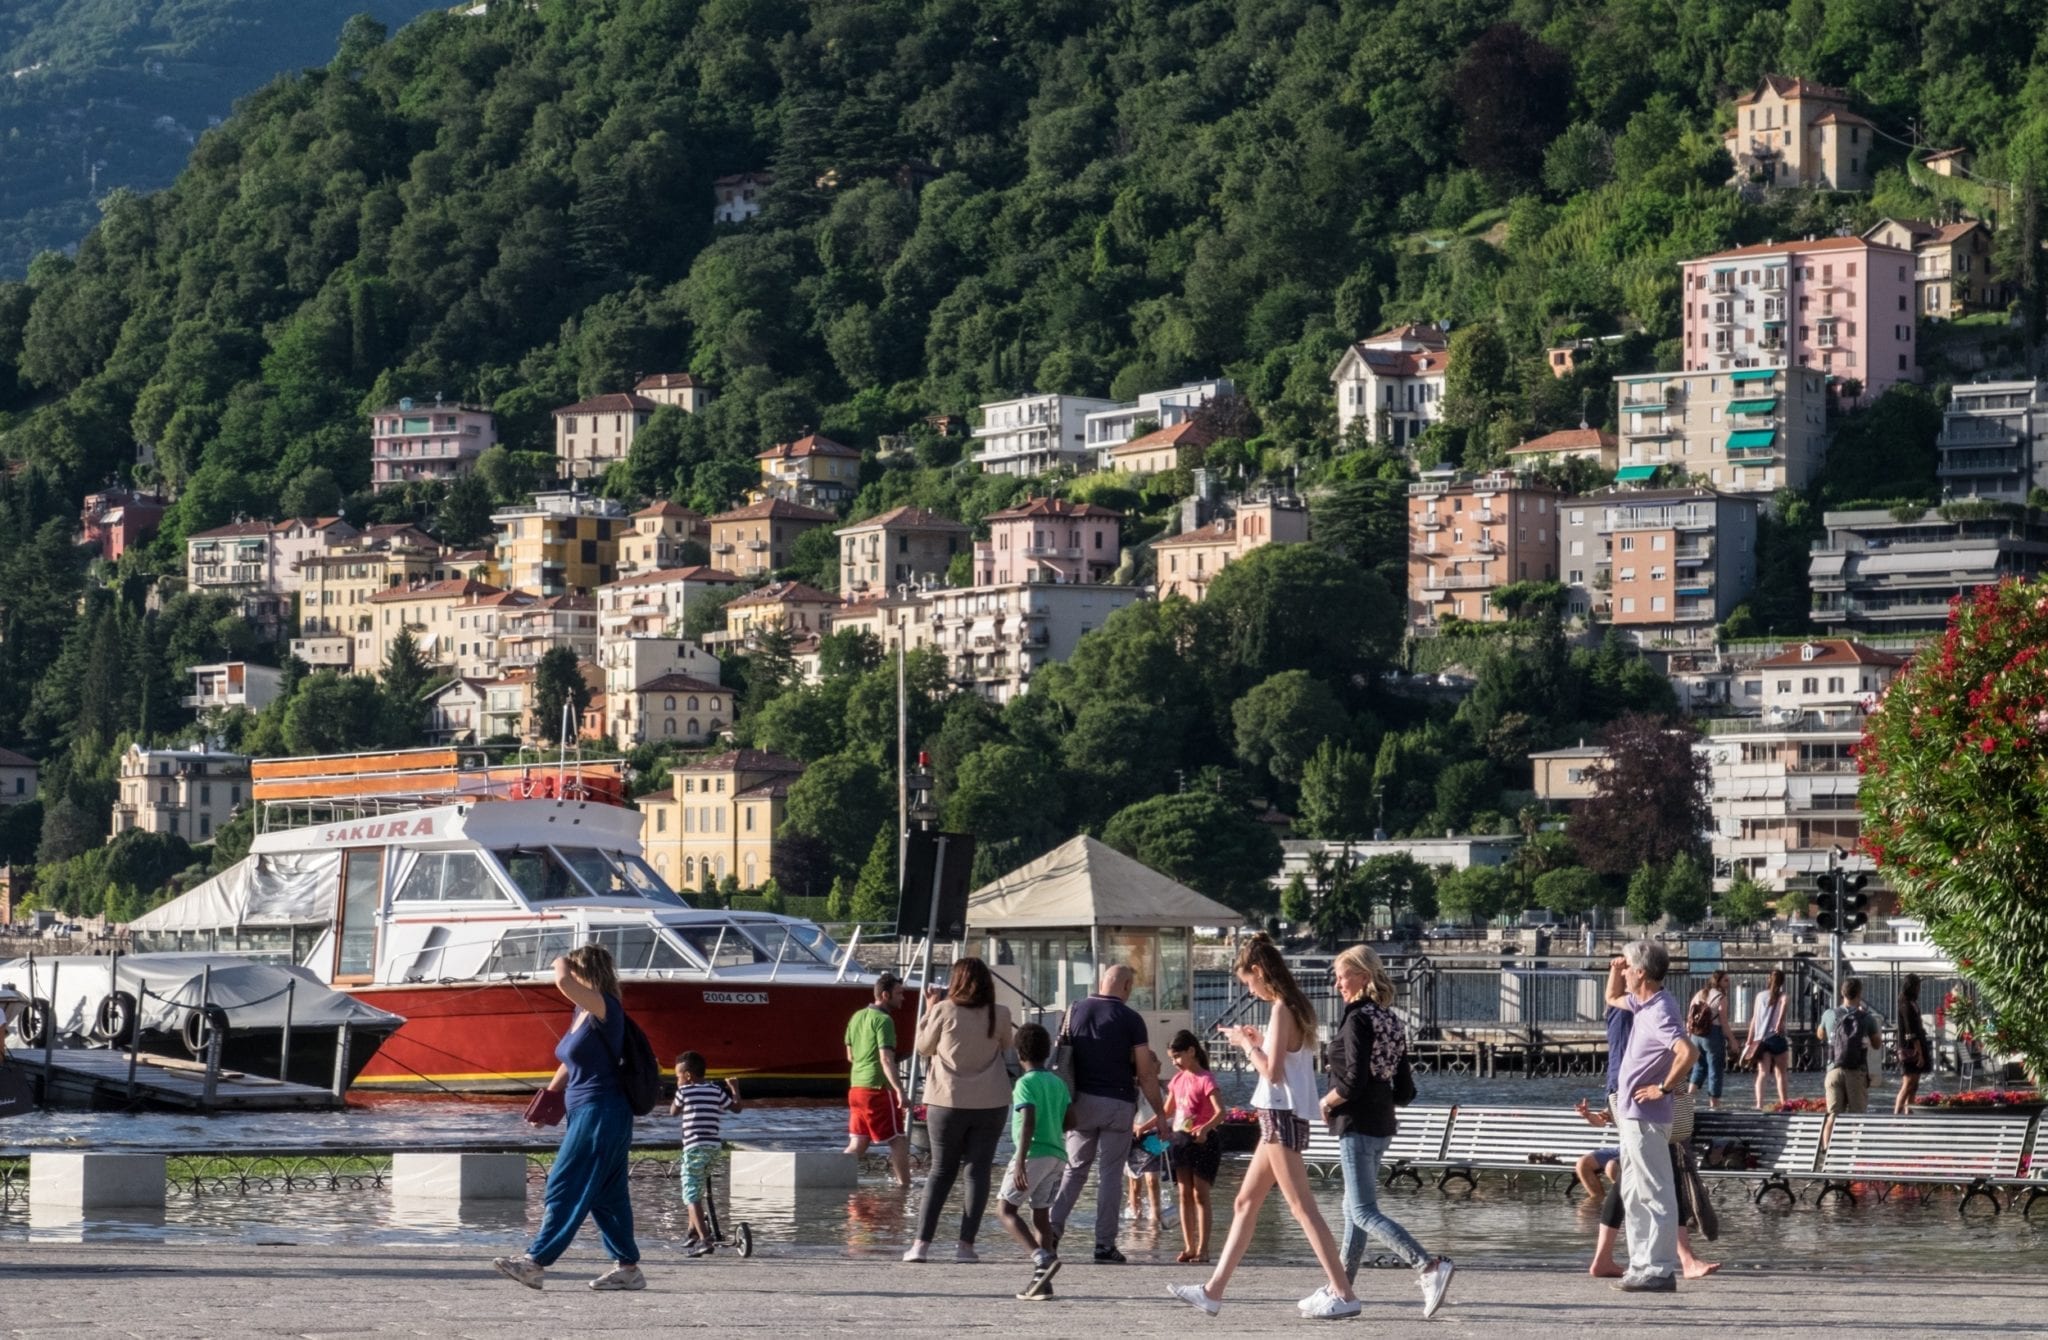 People walk on a piazza in front of buildings nestled into the hills of Lake Como.